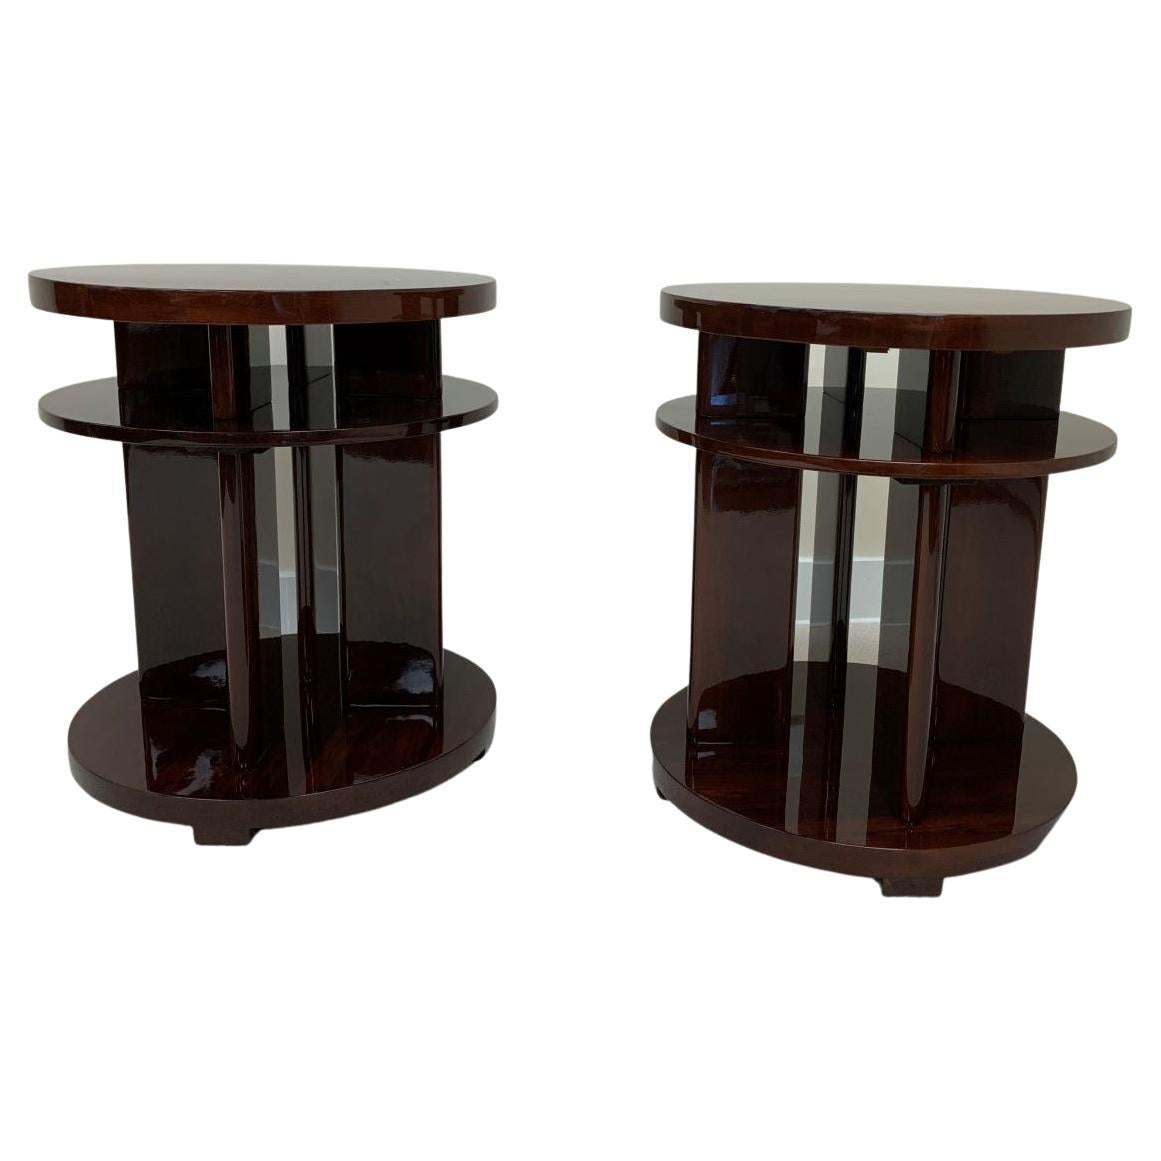 Stained Pair of American Modern Art Deco Machine Age Three Tier Side Table, circa 1930’s